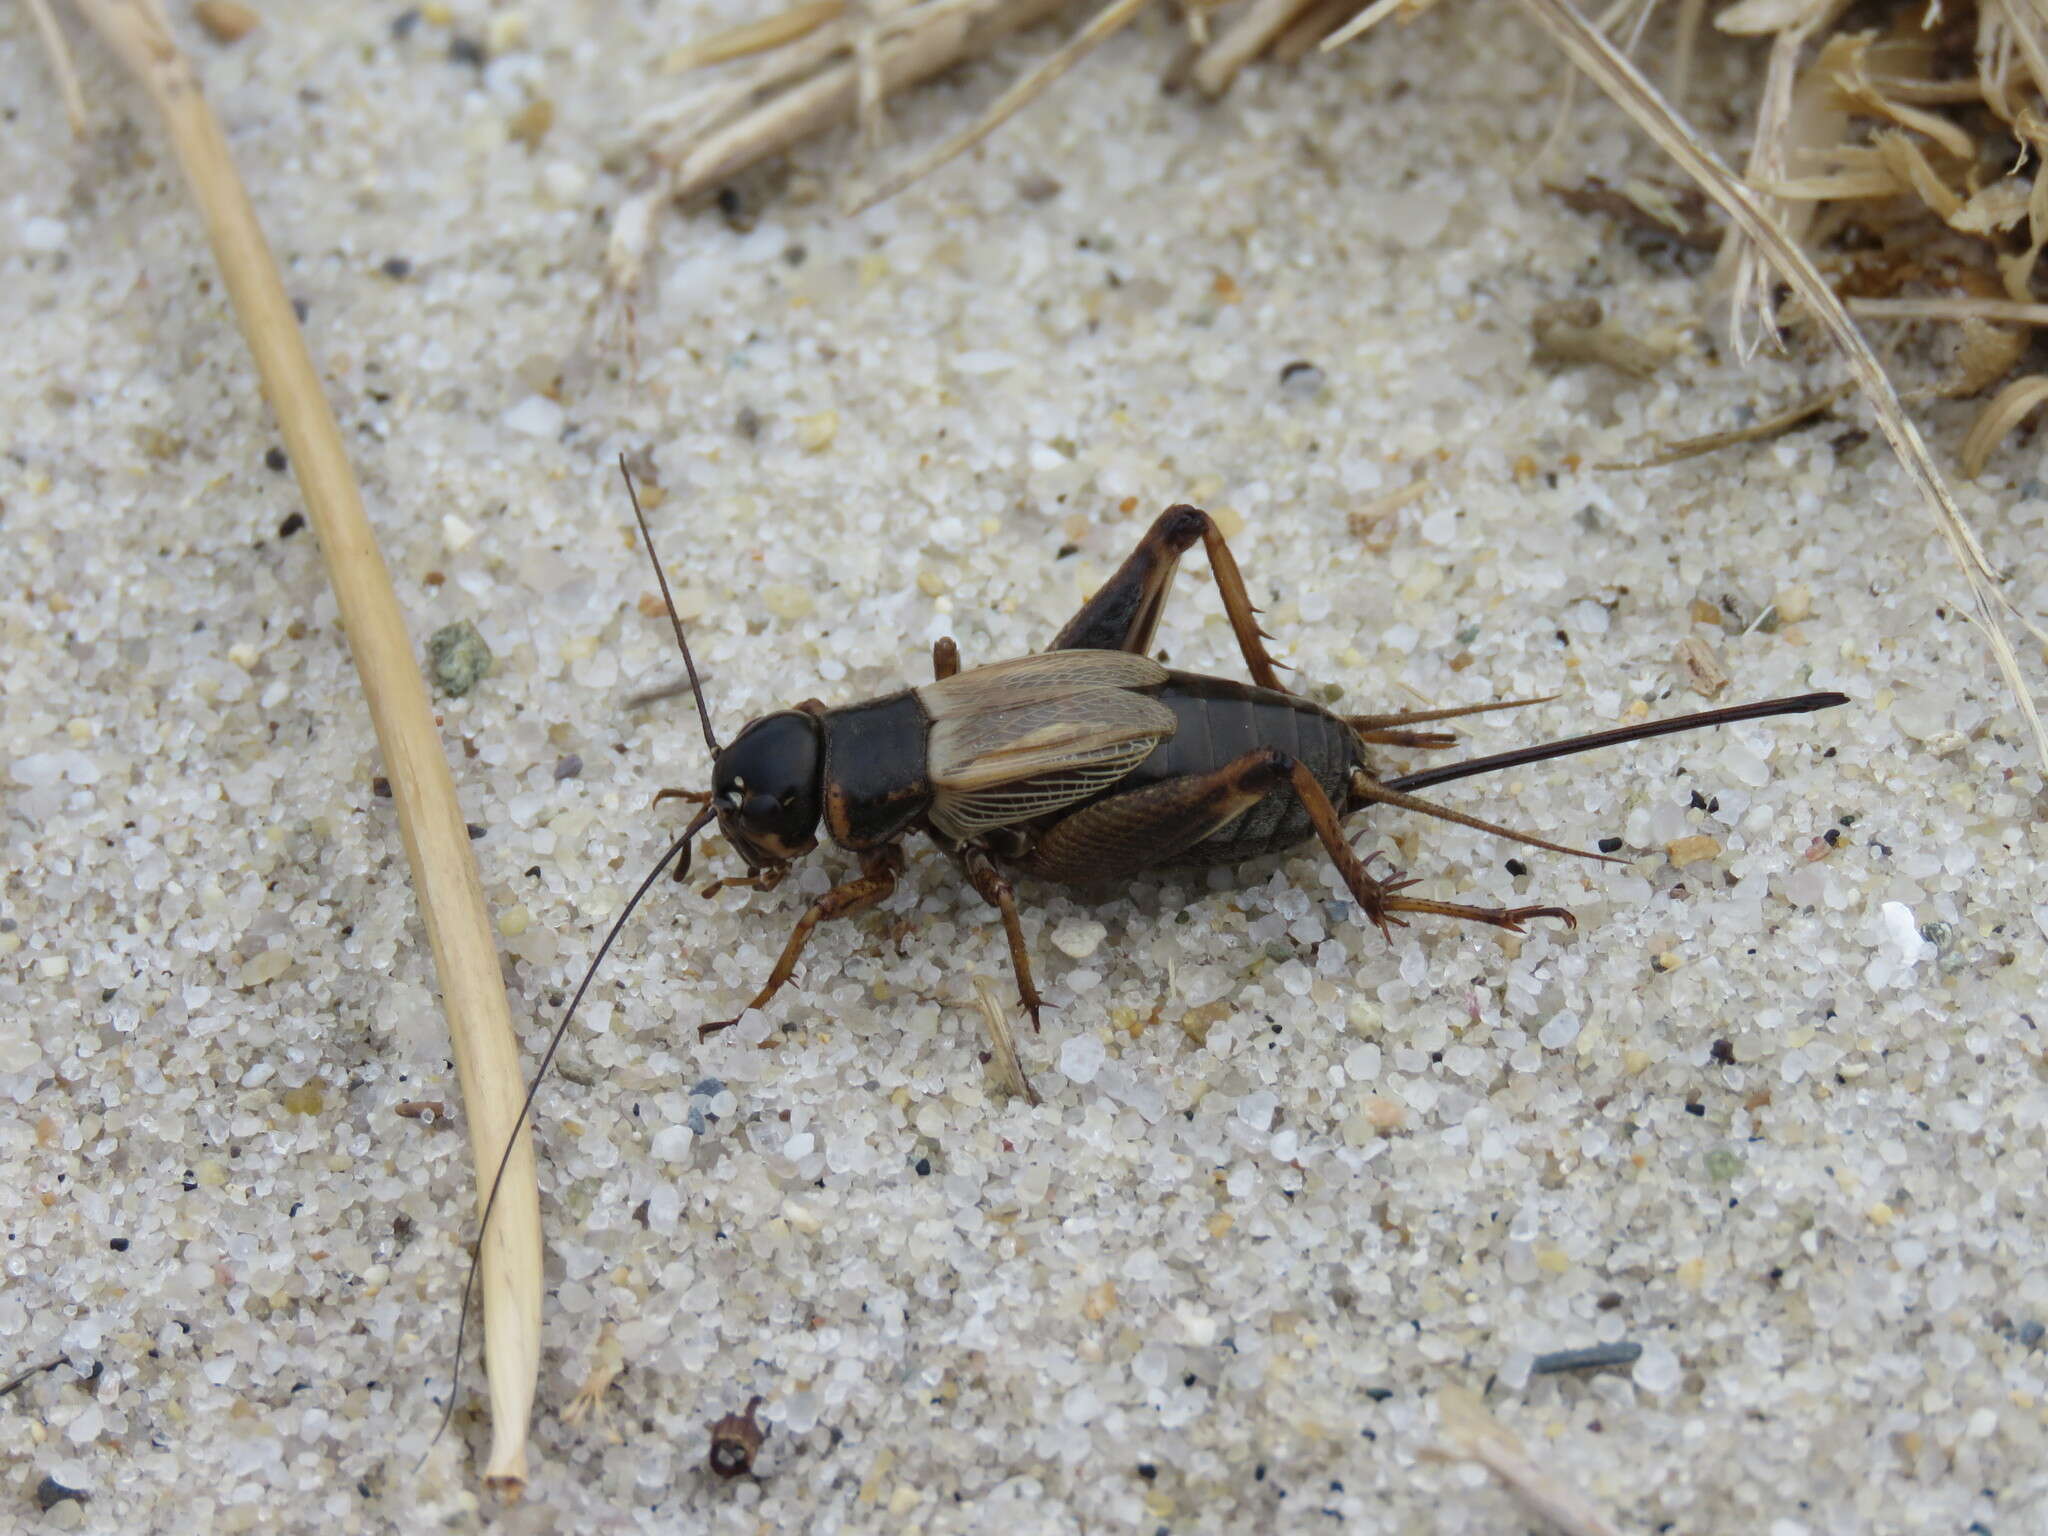 Image of Sand Field Cricket